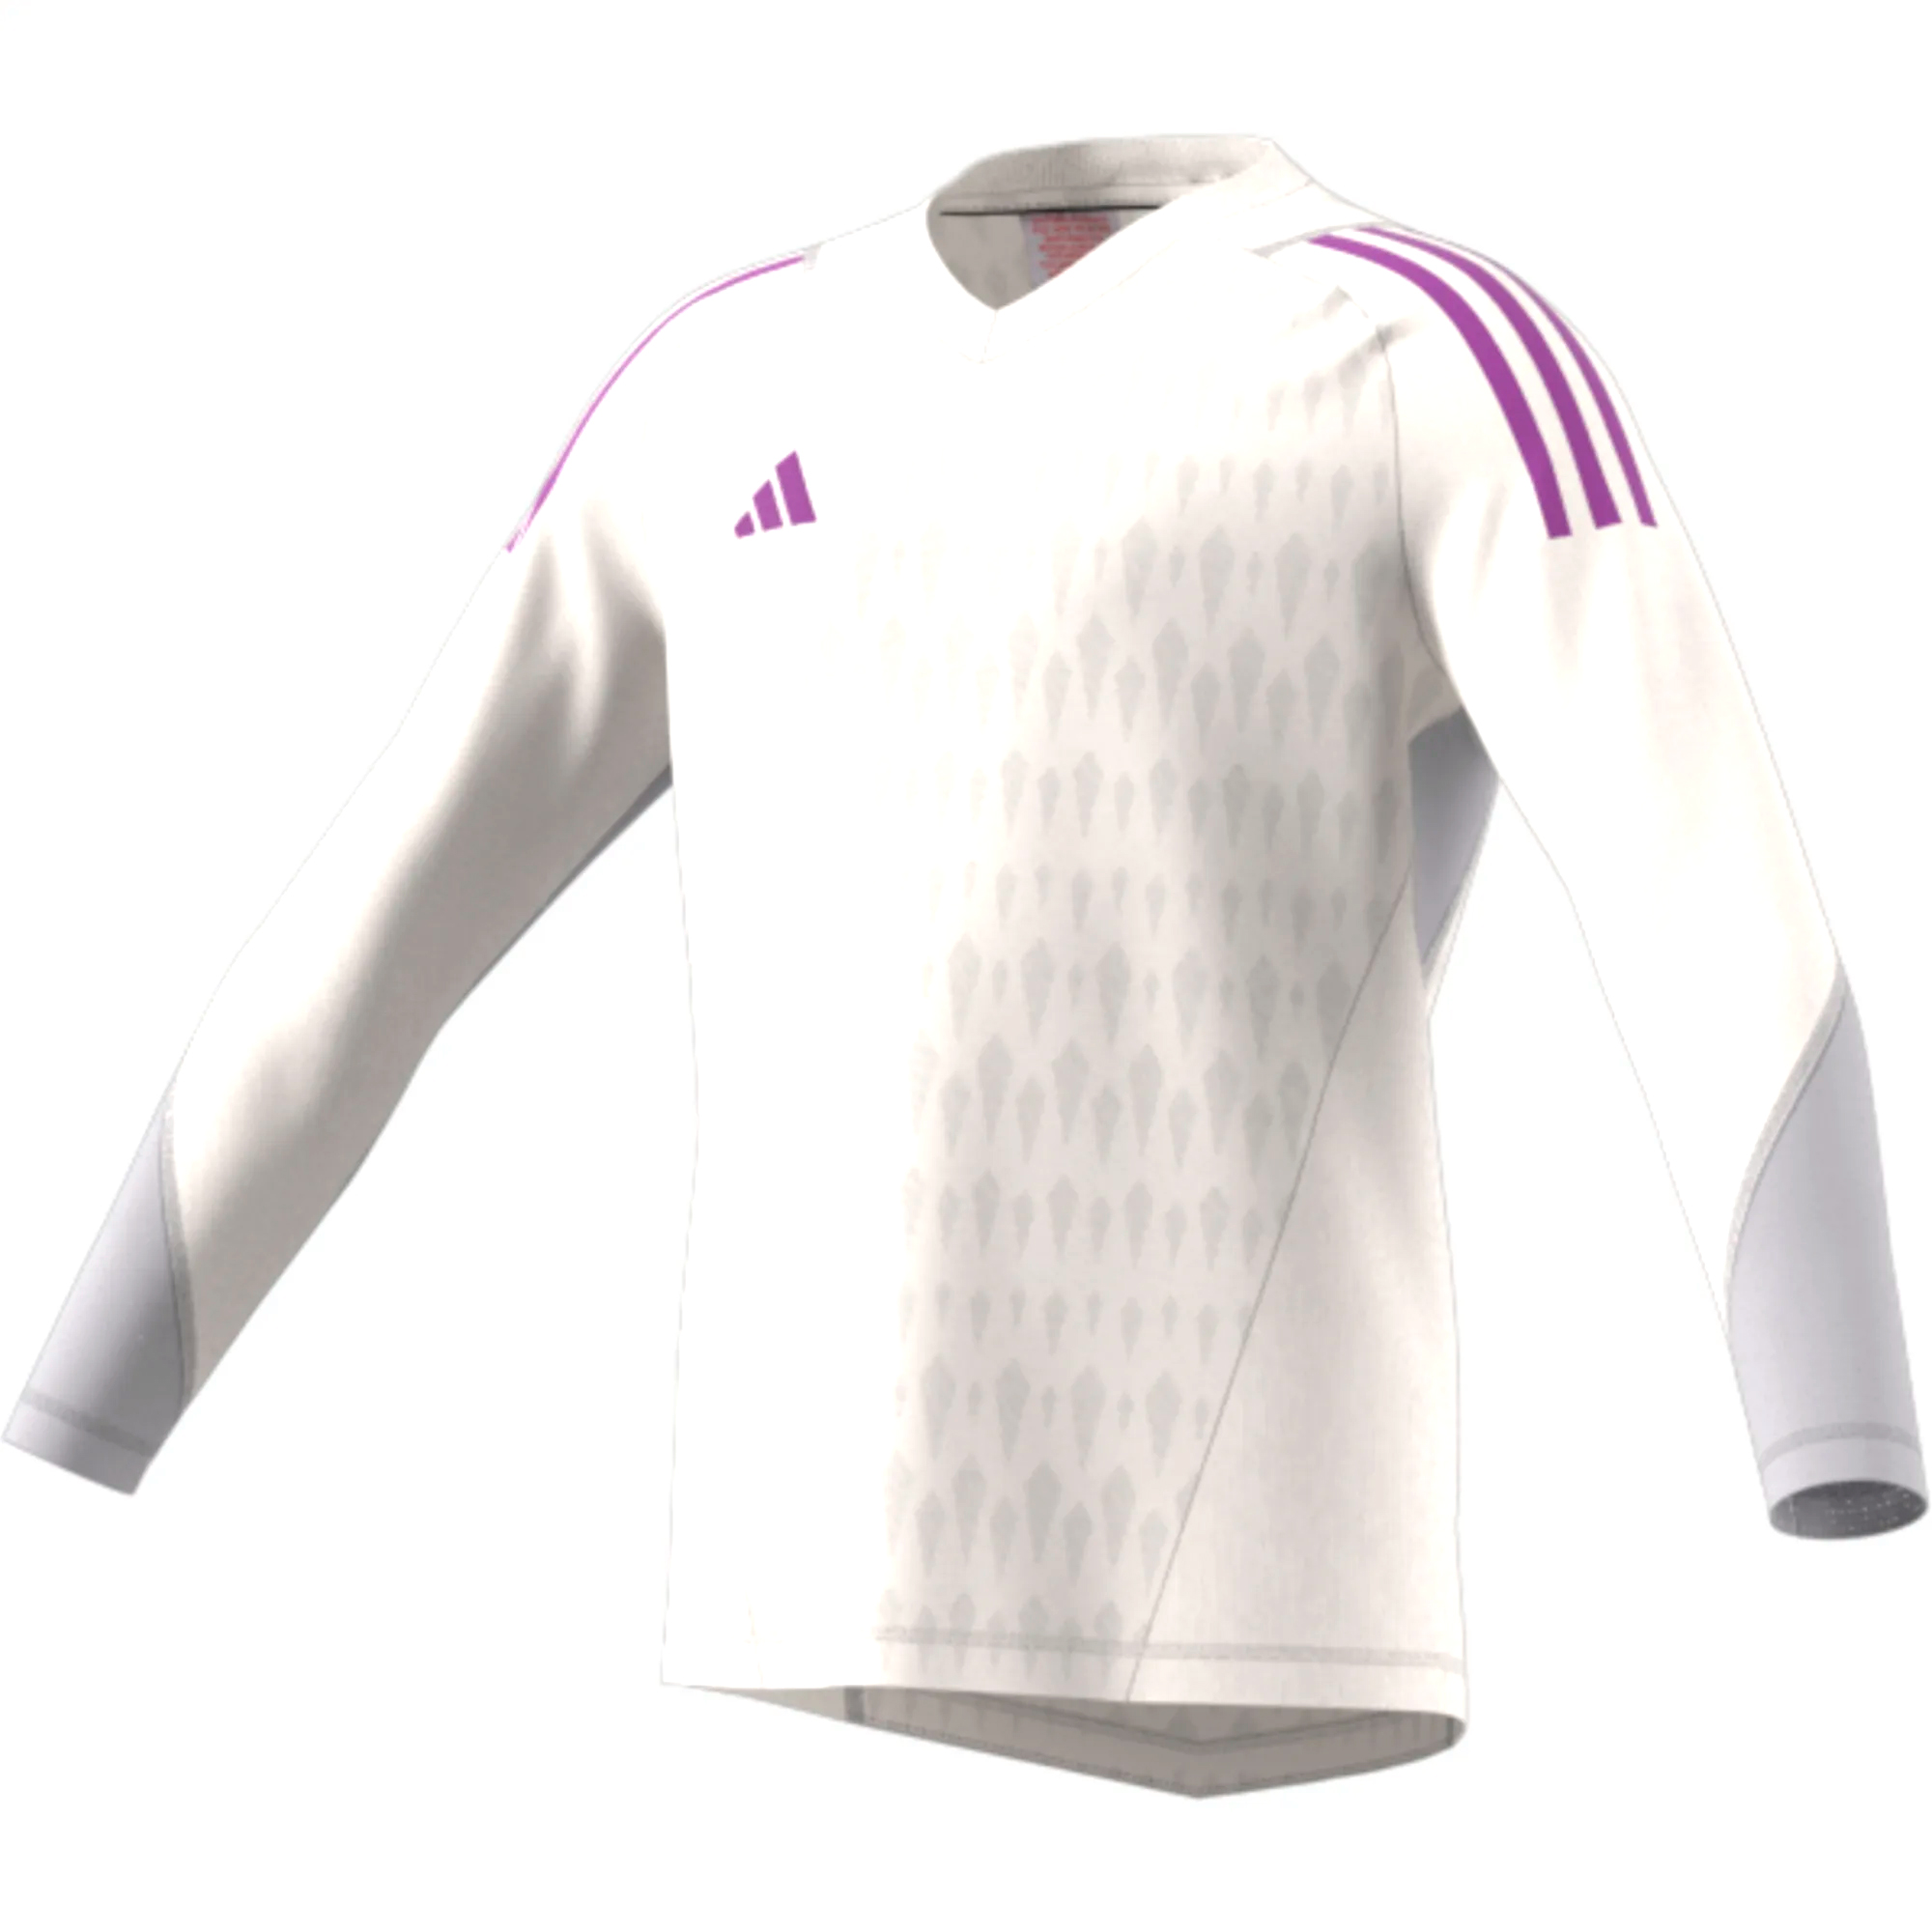 ADIDAS T23 PROMO GK JERSEY LS YOUTH CORE WHITE